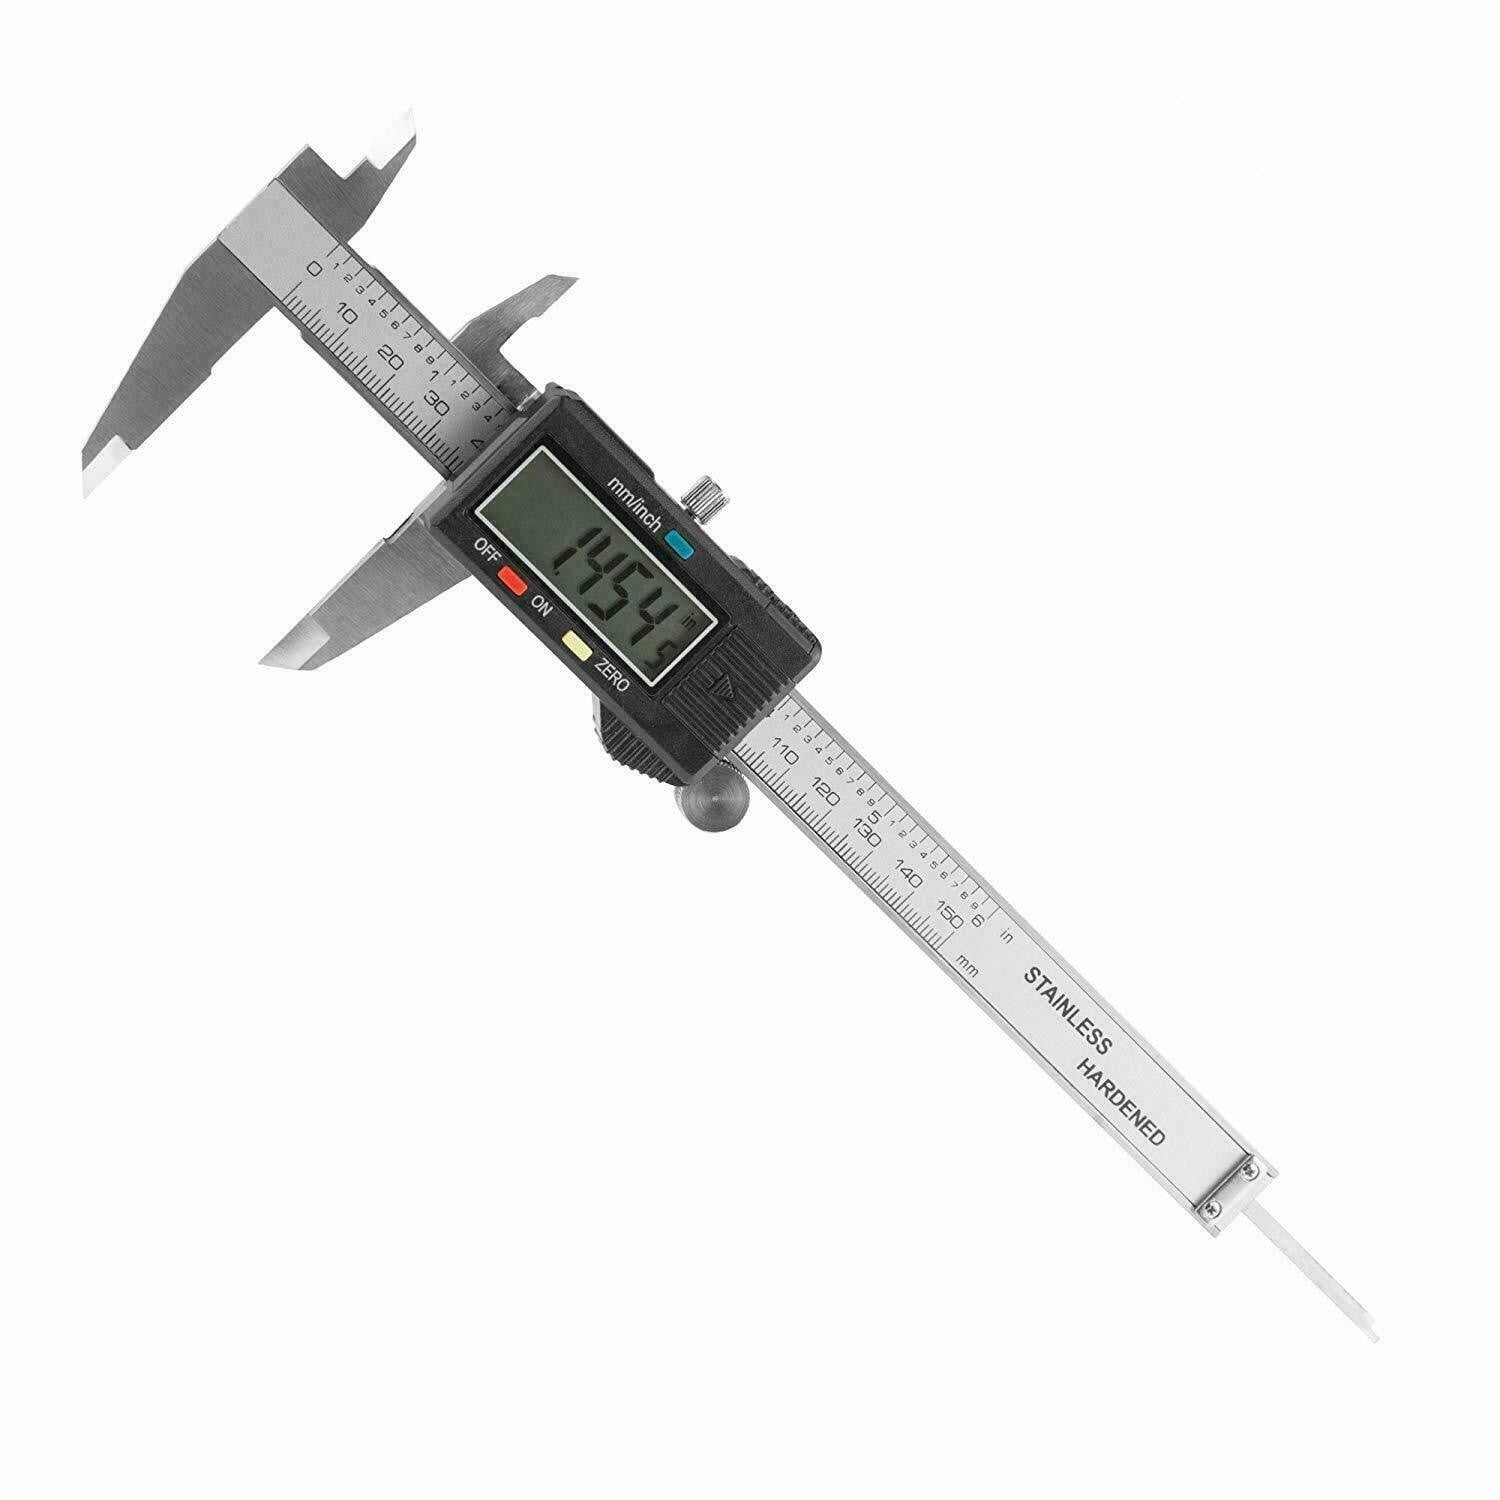 LR44 0.001 in/0.01 mm Digital Caliper Relative Measuring -DC03 Higher Accuracy Auto Off and Battery Included 0-6 in/150 mm Plastic Vernier Caliper with Inch/Millimeter/Fraction Conversion 